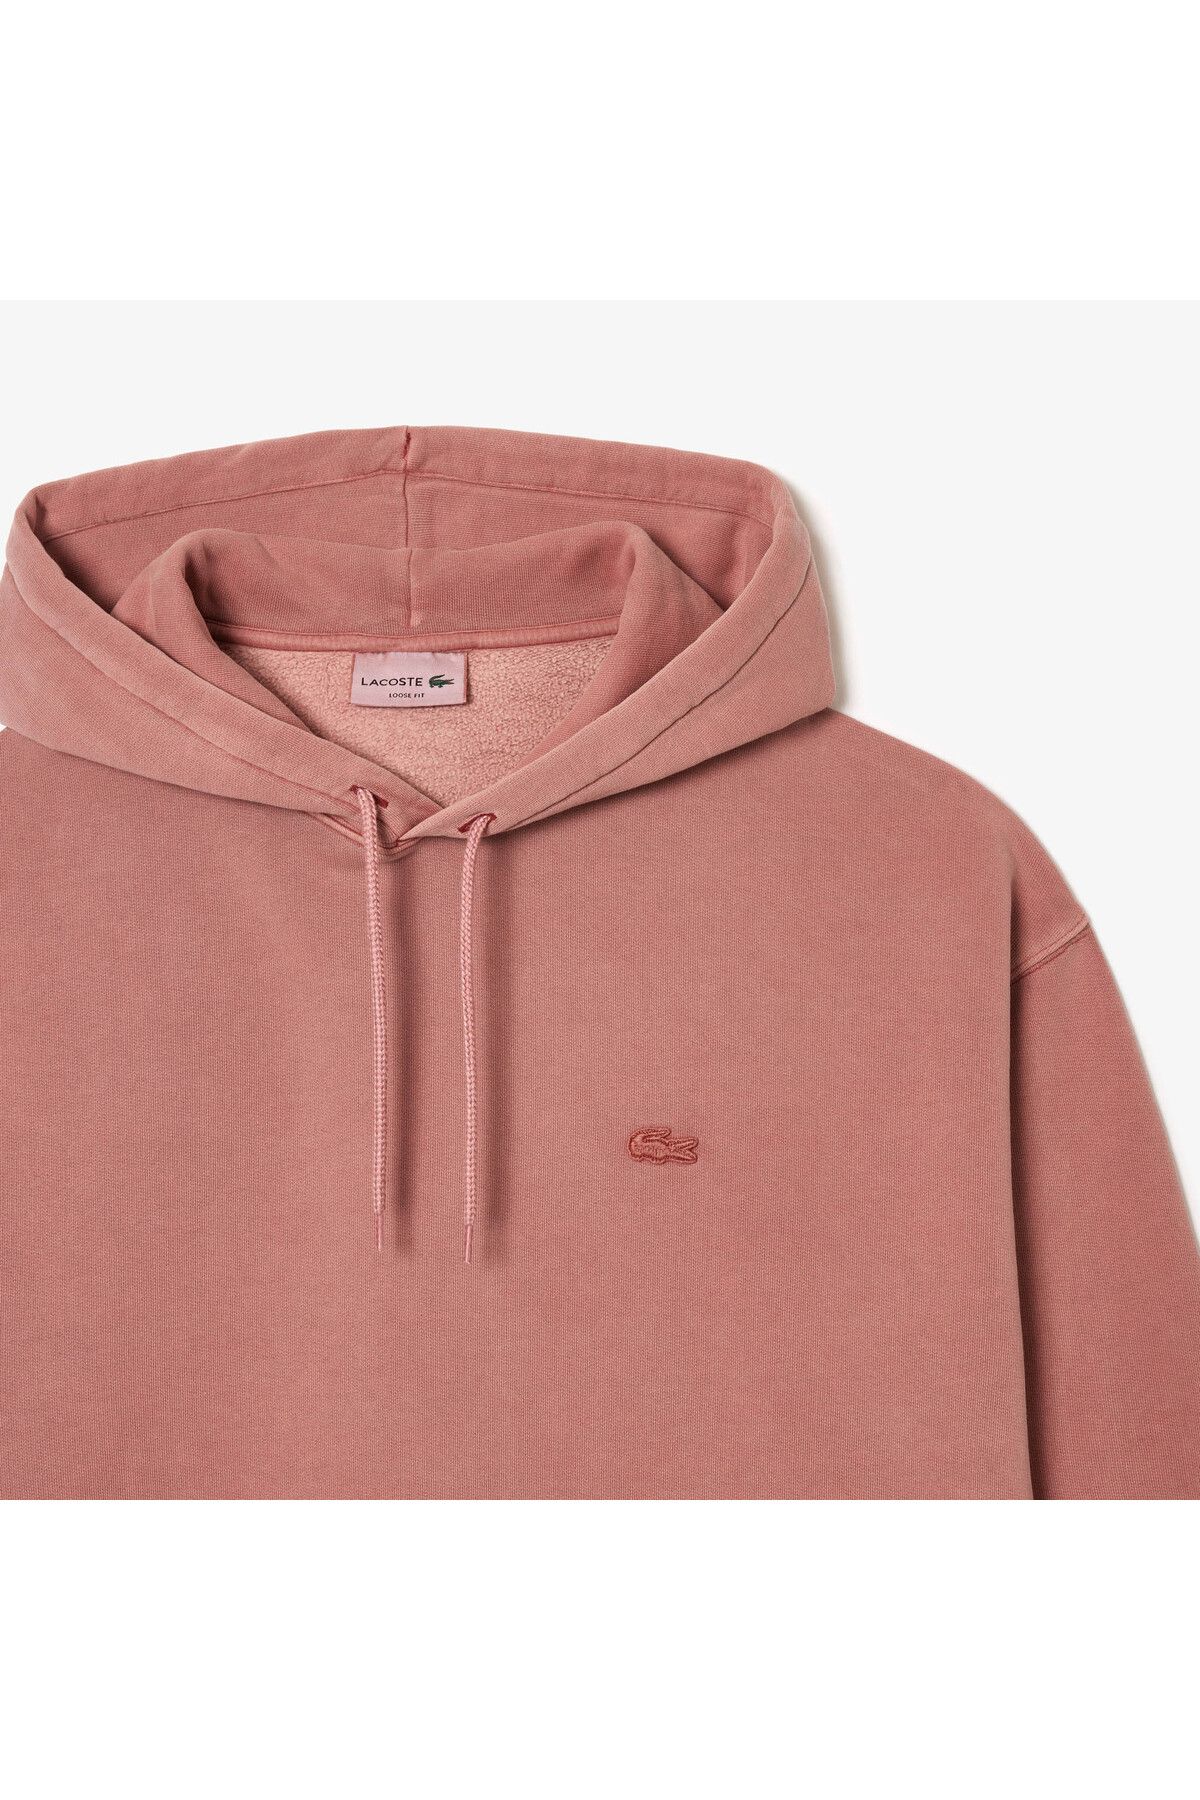 Lacoste Neo Heritage یونیسکس Loose Fit Hasted Pink Sweatshirt